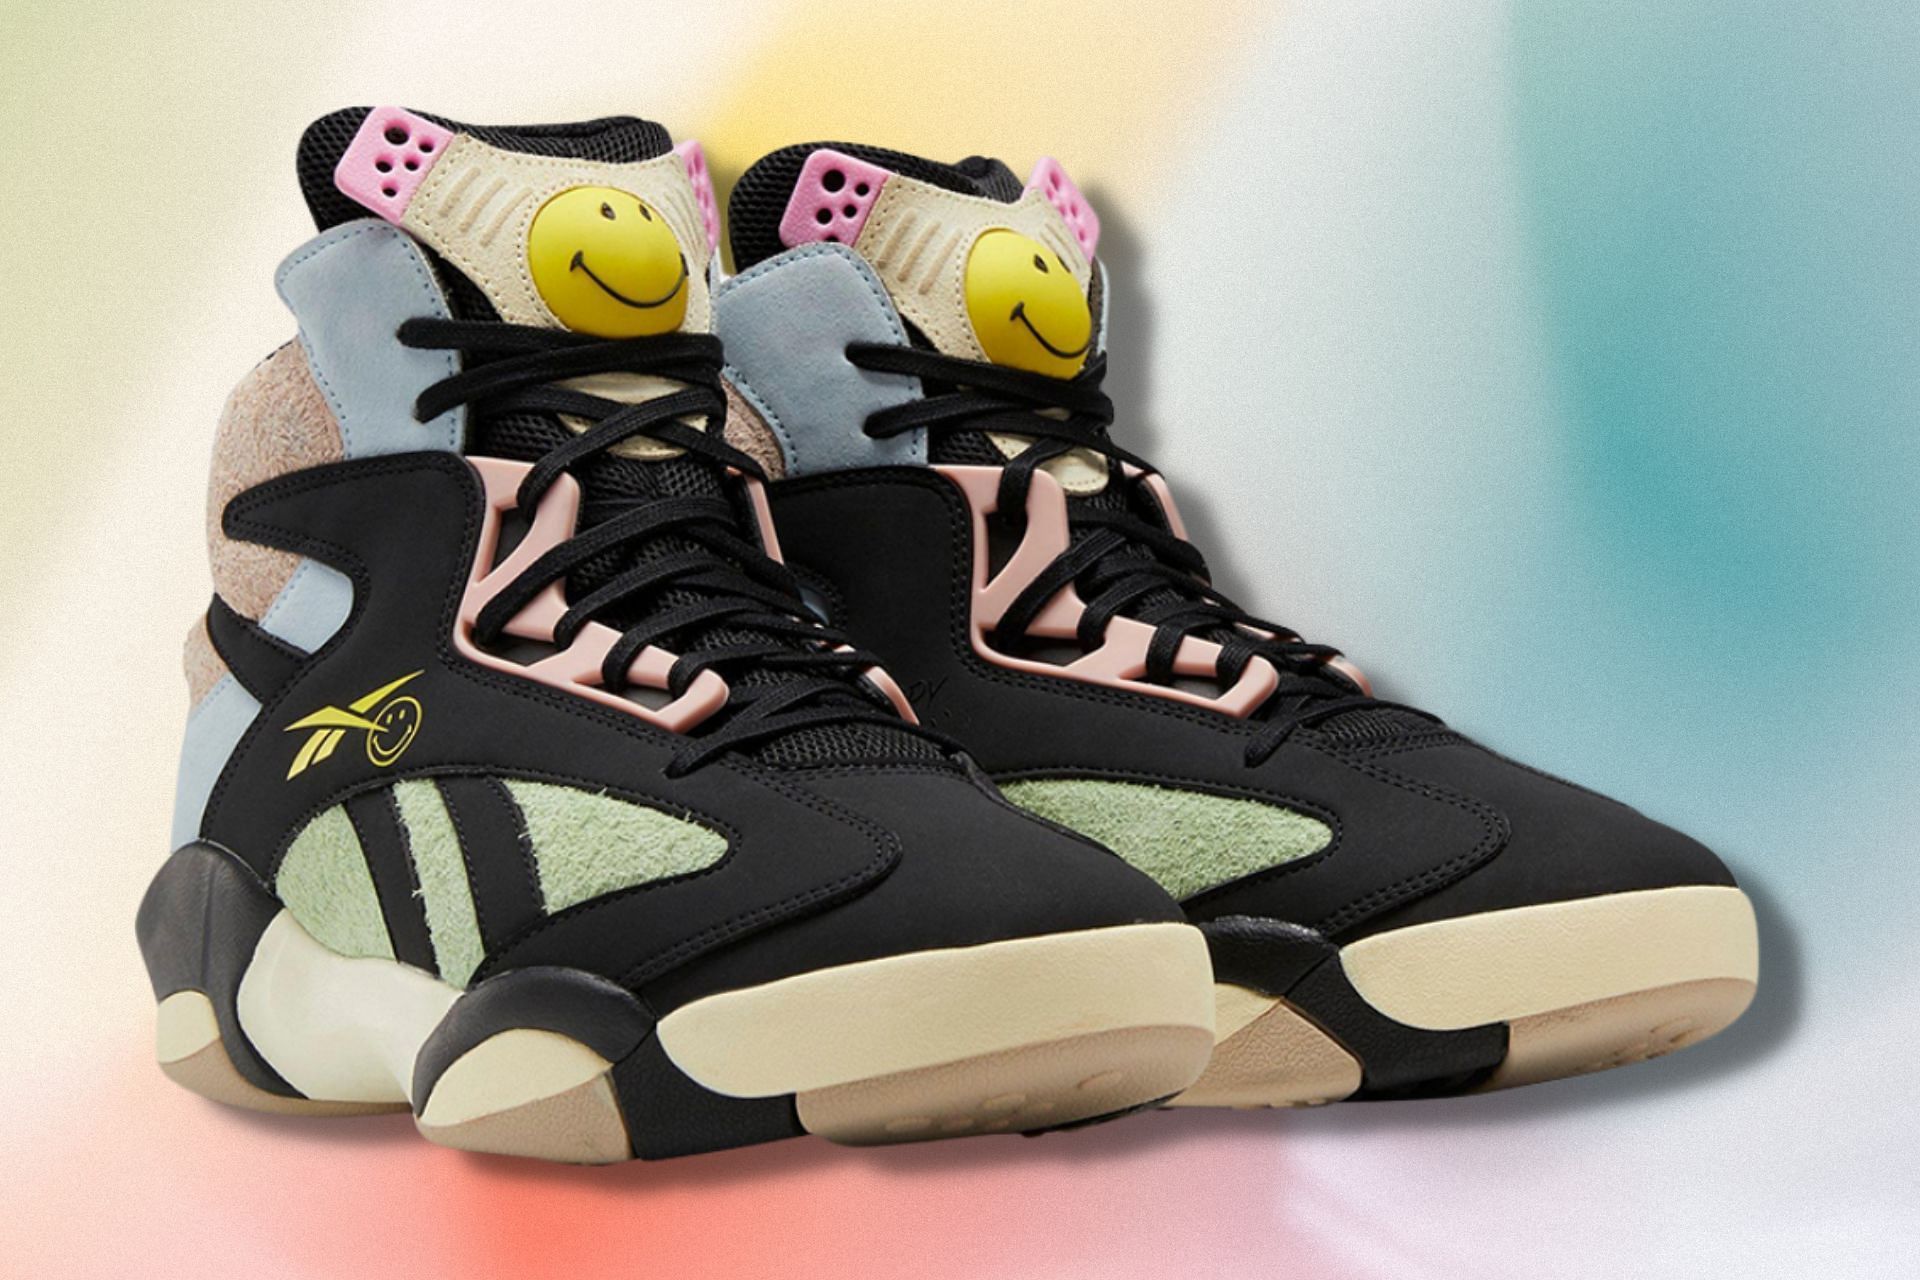 Where to buy Smiley x Reebok Shaq Attaq shoes? Price, release date, and ...